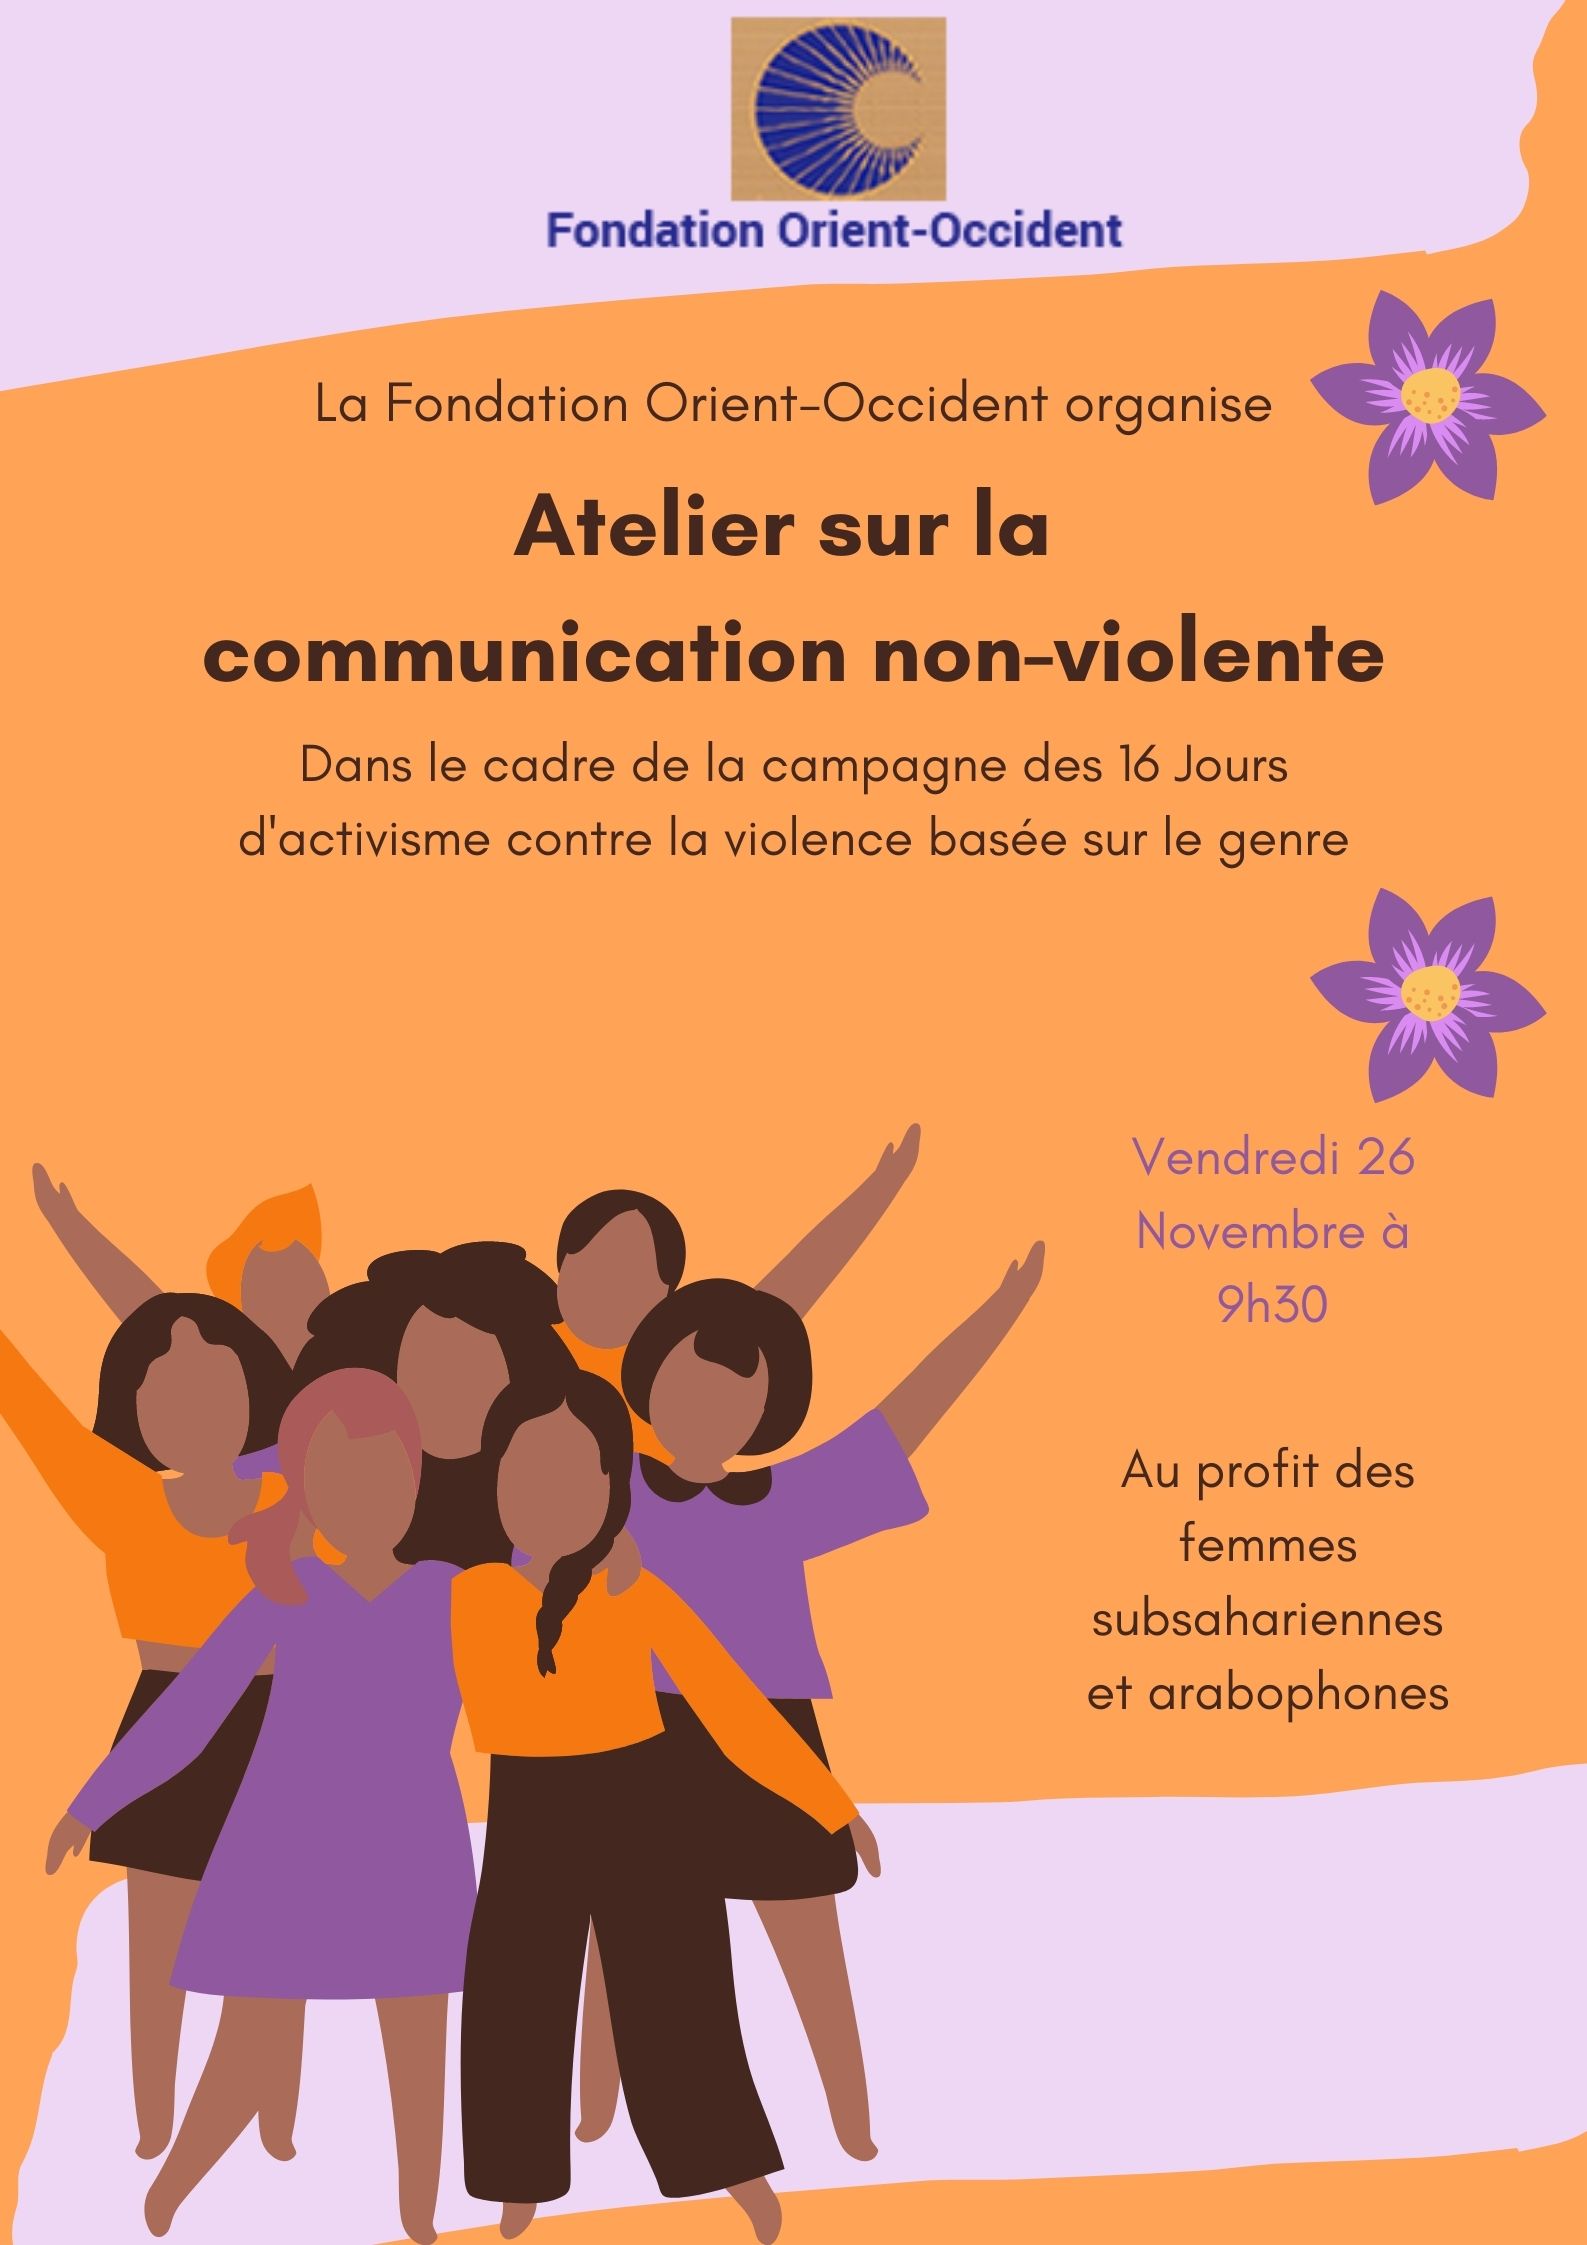 #16daysofactivism – Workshops and activities at the Fondation Orient-Occident